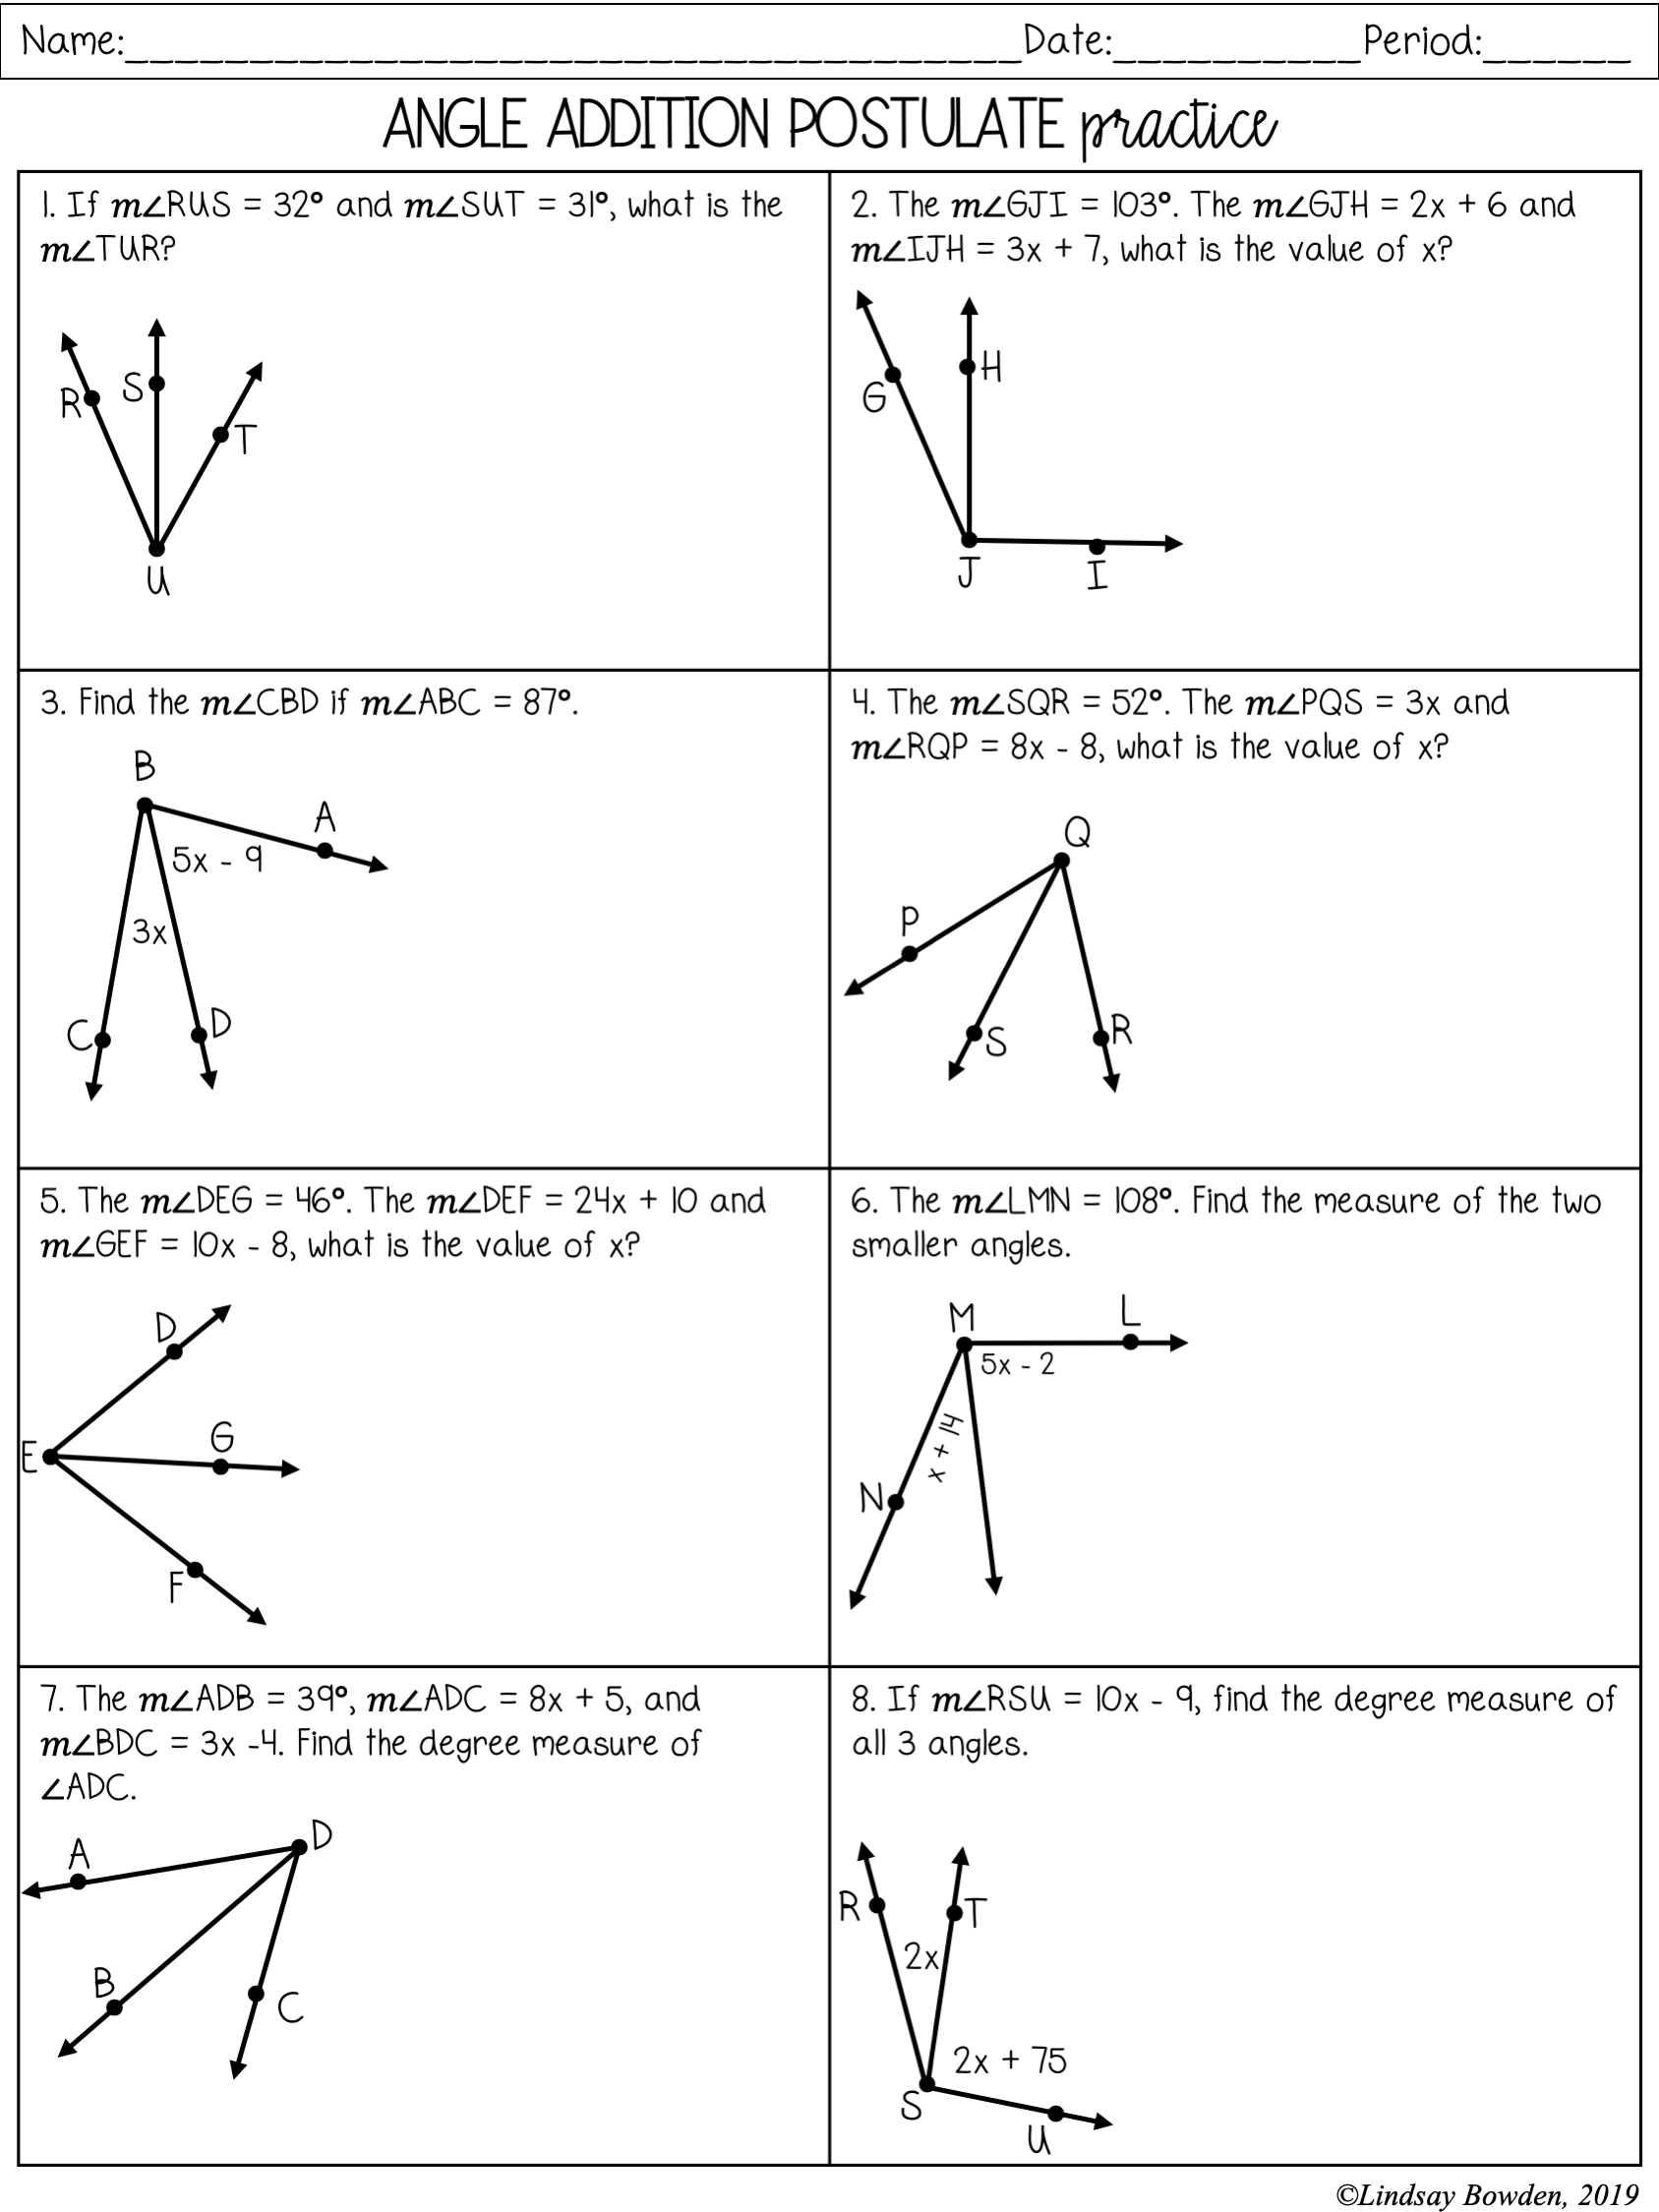 Segment and Angle Addition Postulate Notes and Worksheets In Angle Addition Postulate Worksheet